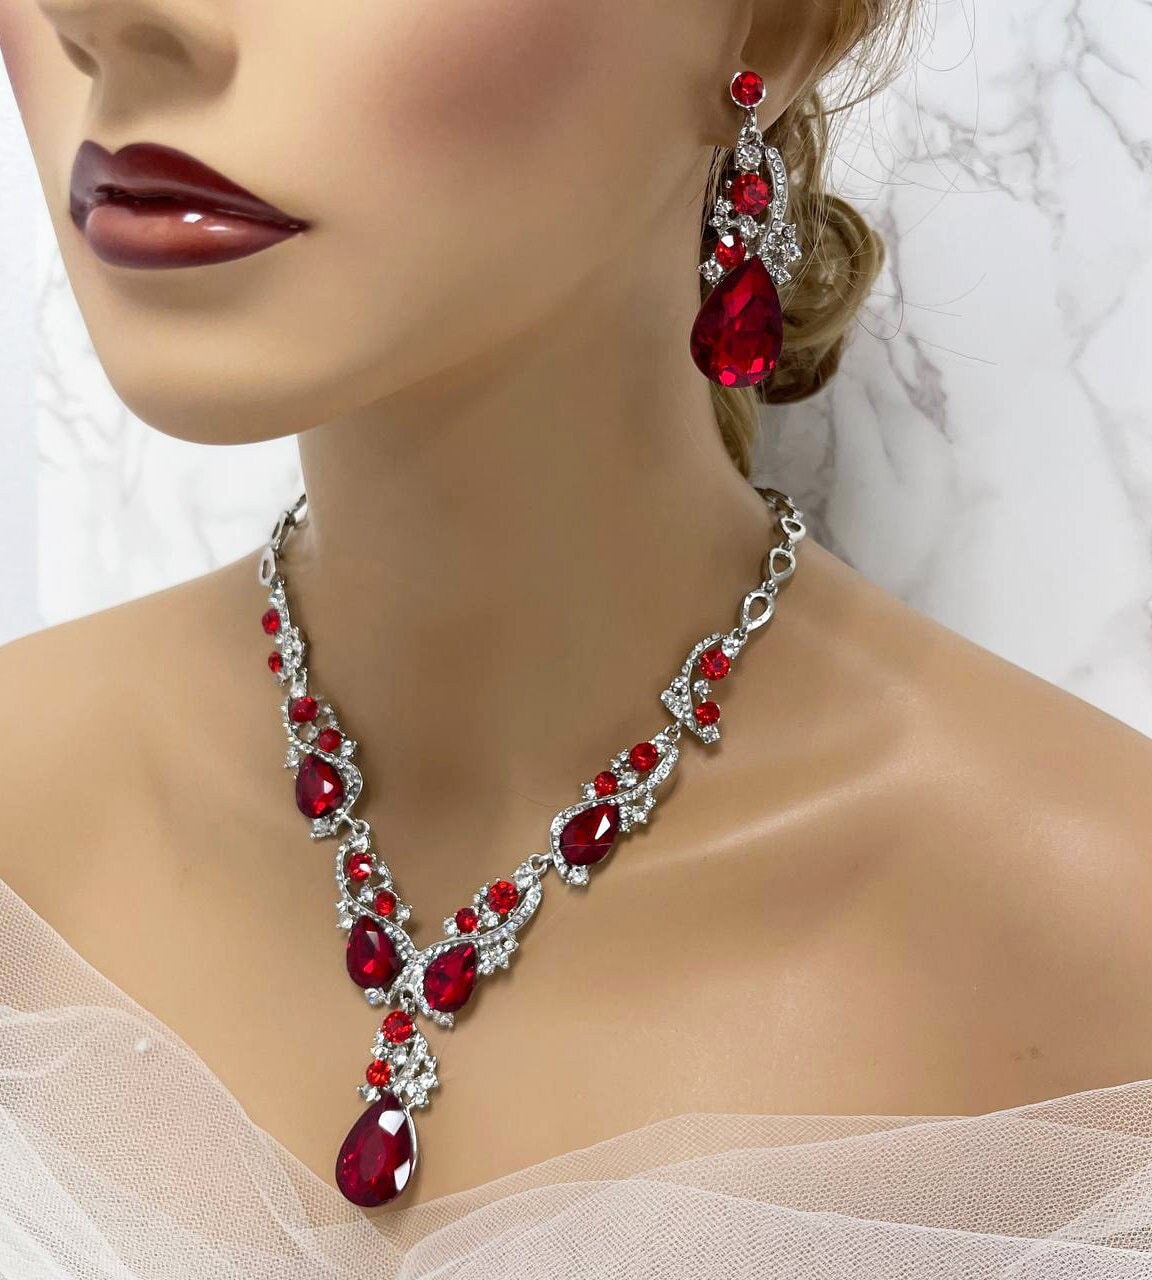 Buy Bridal Jewelry Set Bridesmaid Jewelry Set Red Wedding Online in India   Etsy